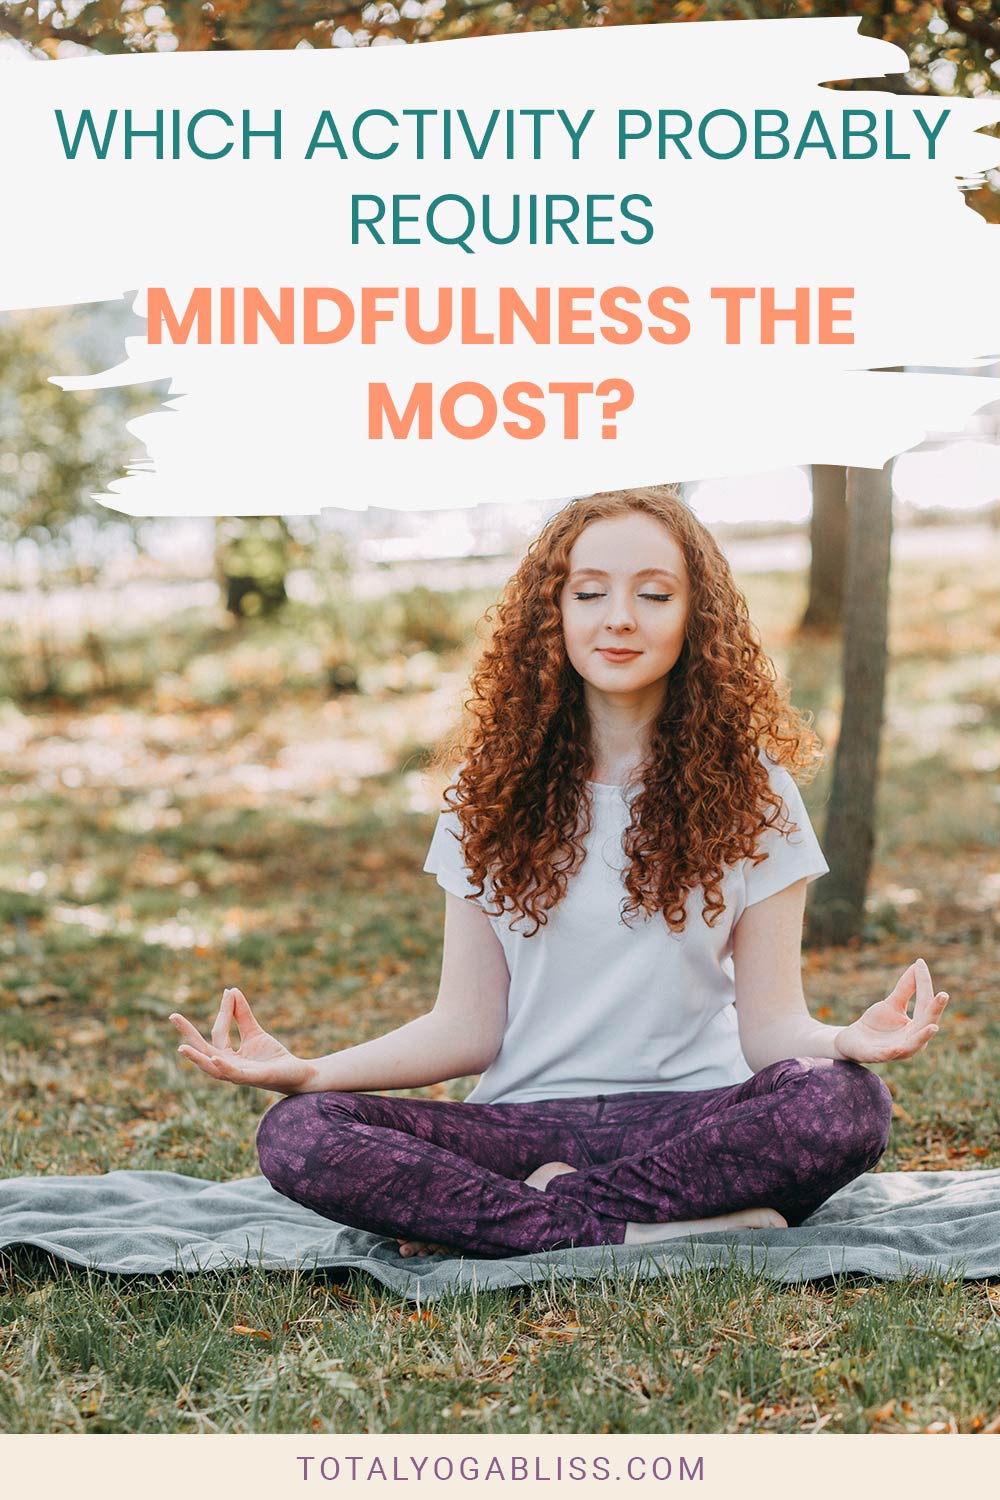 Which Activity Probably Requires Mindfulness the Most?